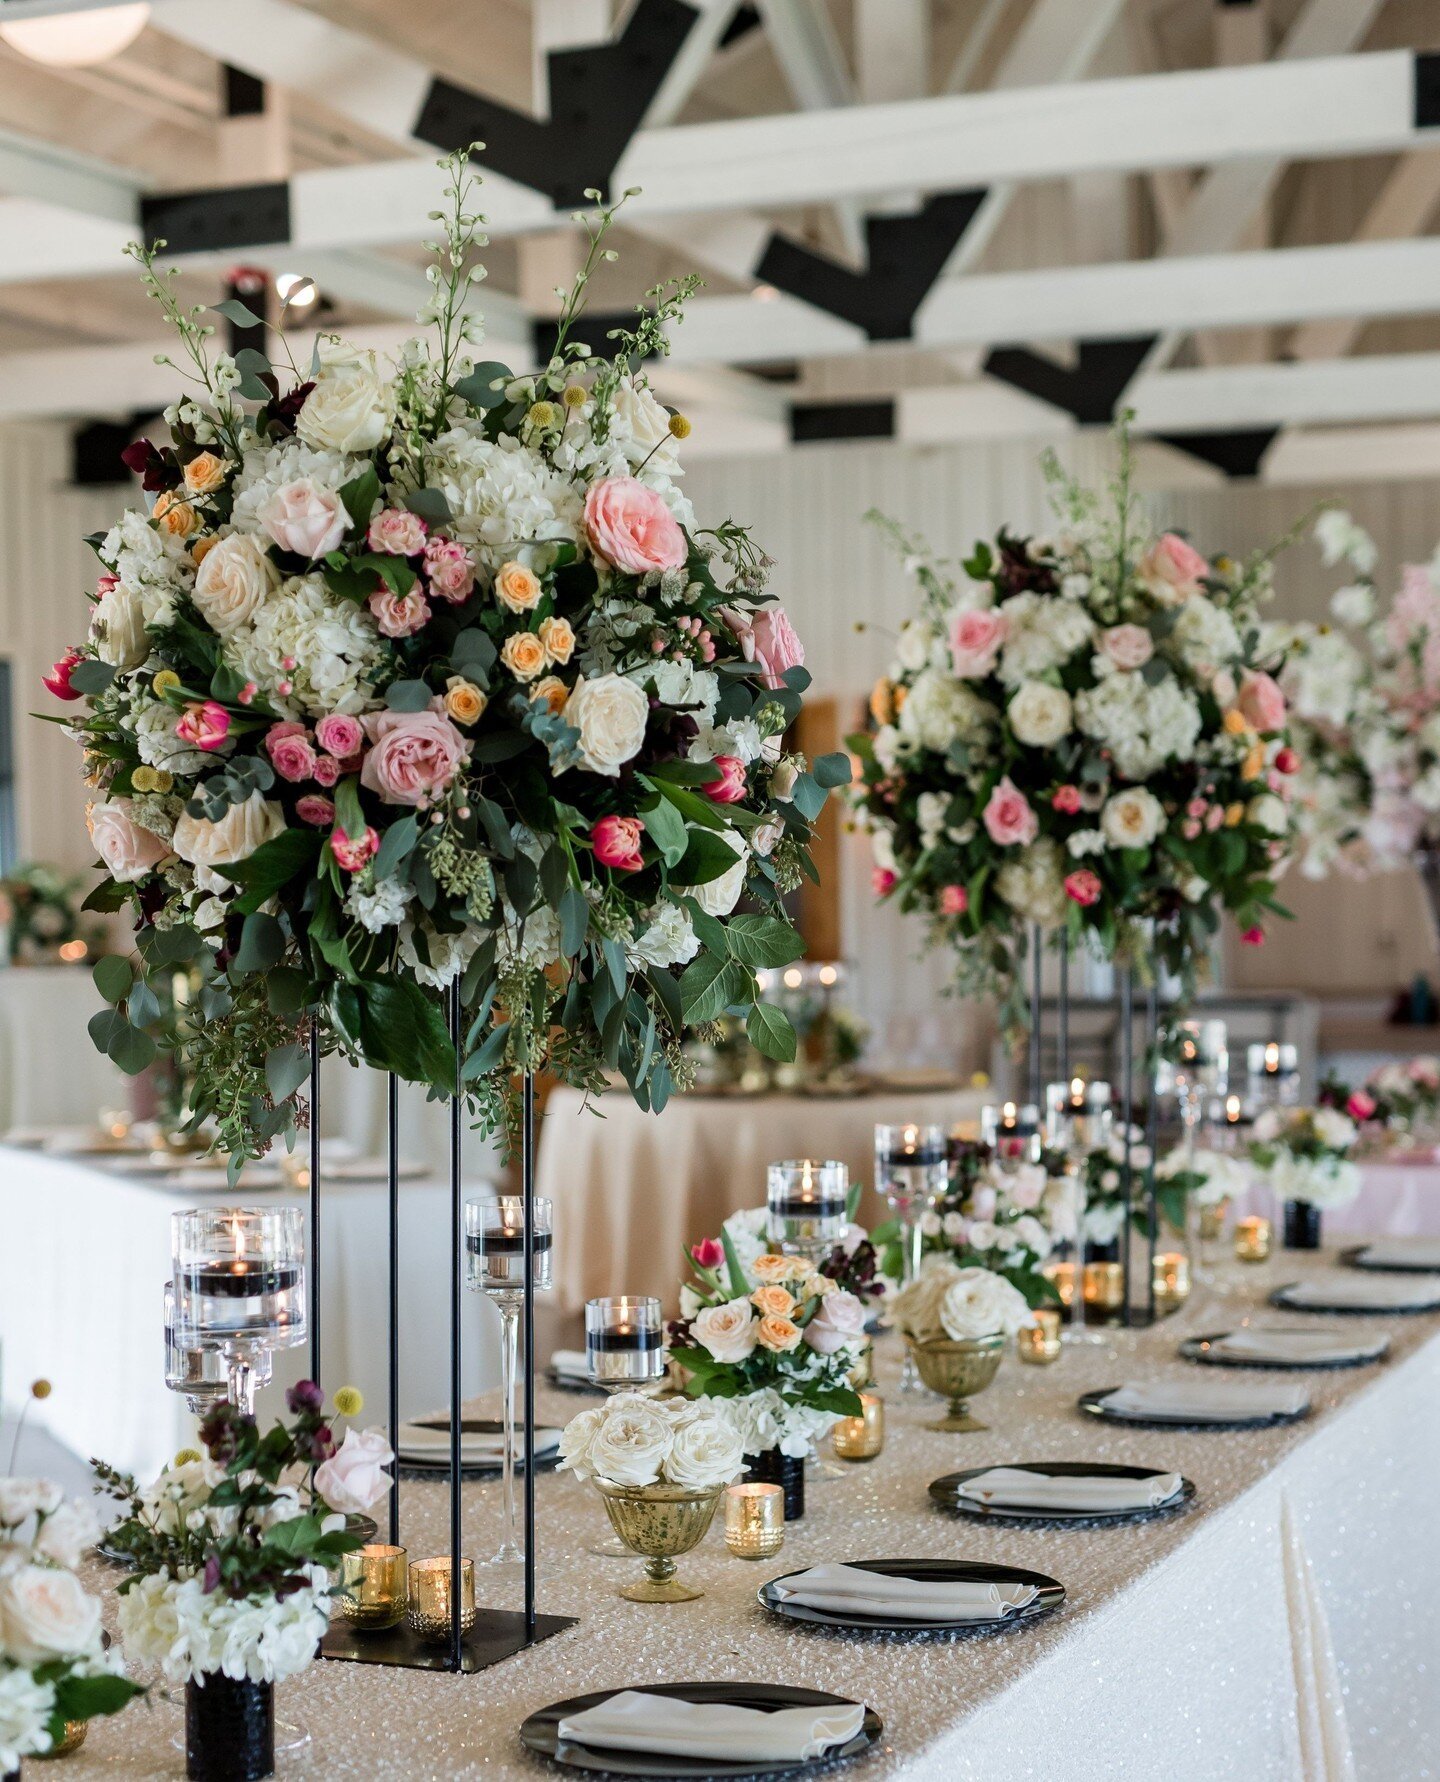 Here at the Design Haus, we prioritize not just the visual impact, but also the strategic placement to enhance the overall atmosphere of your wedding. ⁠
⁠
Explore a range of carefully crafted options to suit your style, creating a sophisticated and c